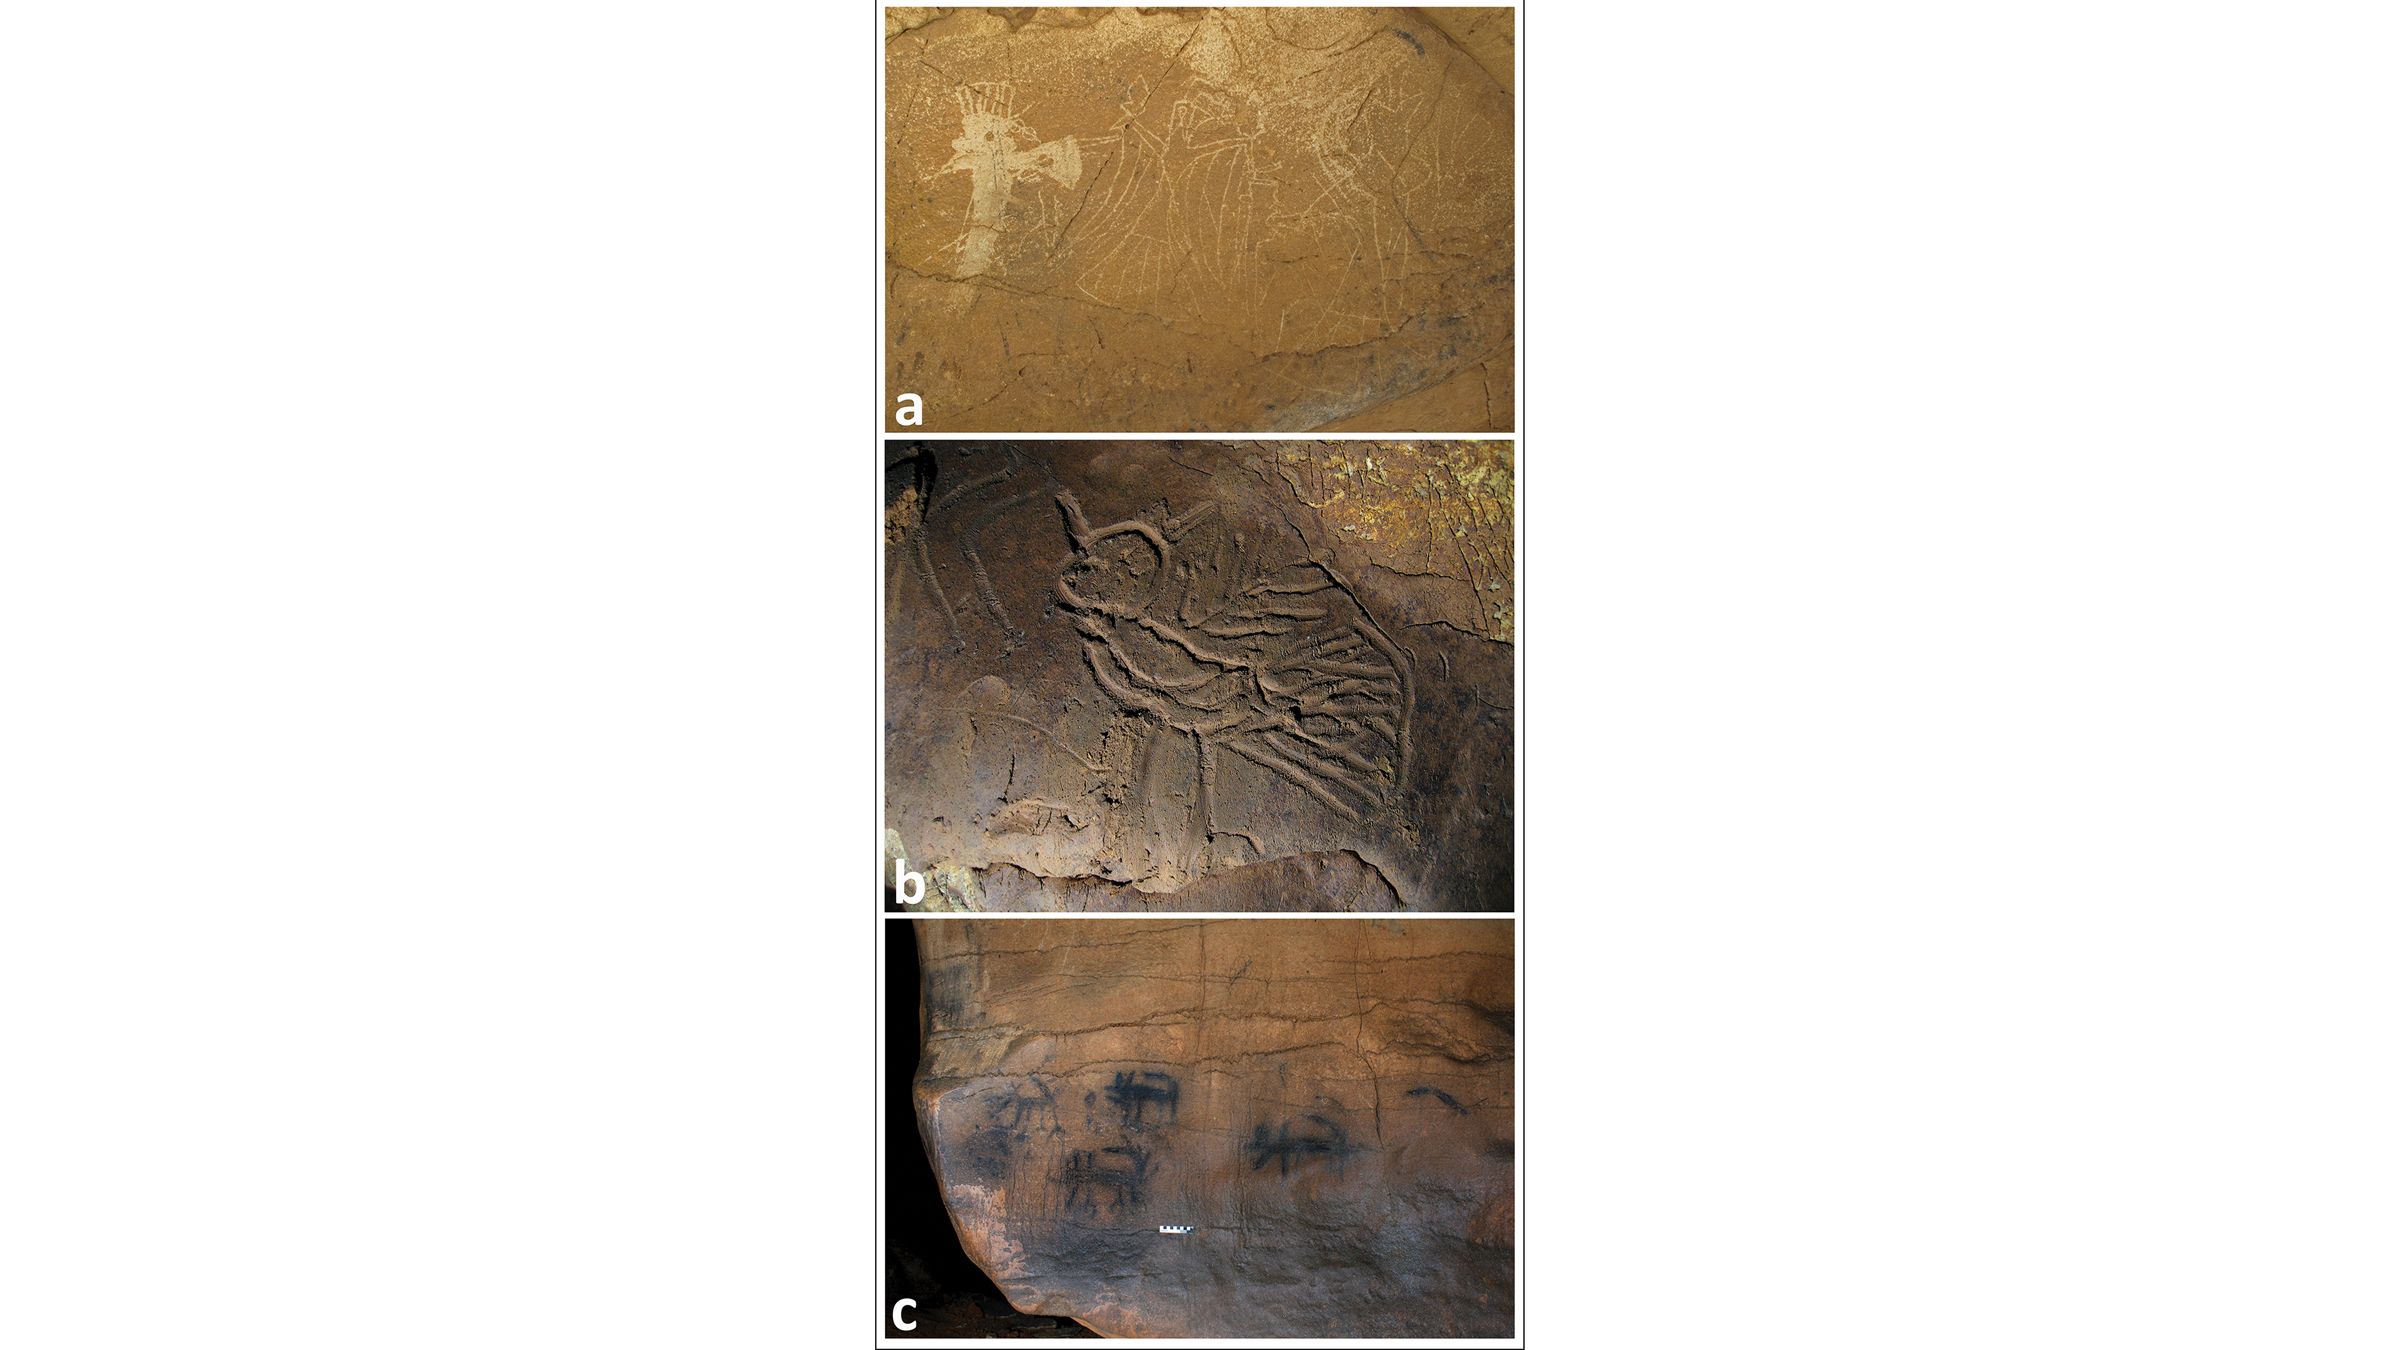 Photos of (A) petroglyphs of birds and weapons from the 11th unnamed cave, (B) a mud glyph owl from Mud Glyph Cave and (C) pictographs of canids from the 48th unnamed cave in Tennessee.